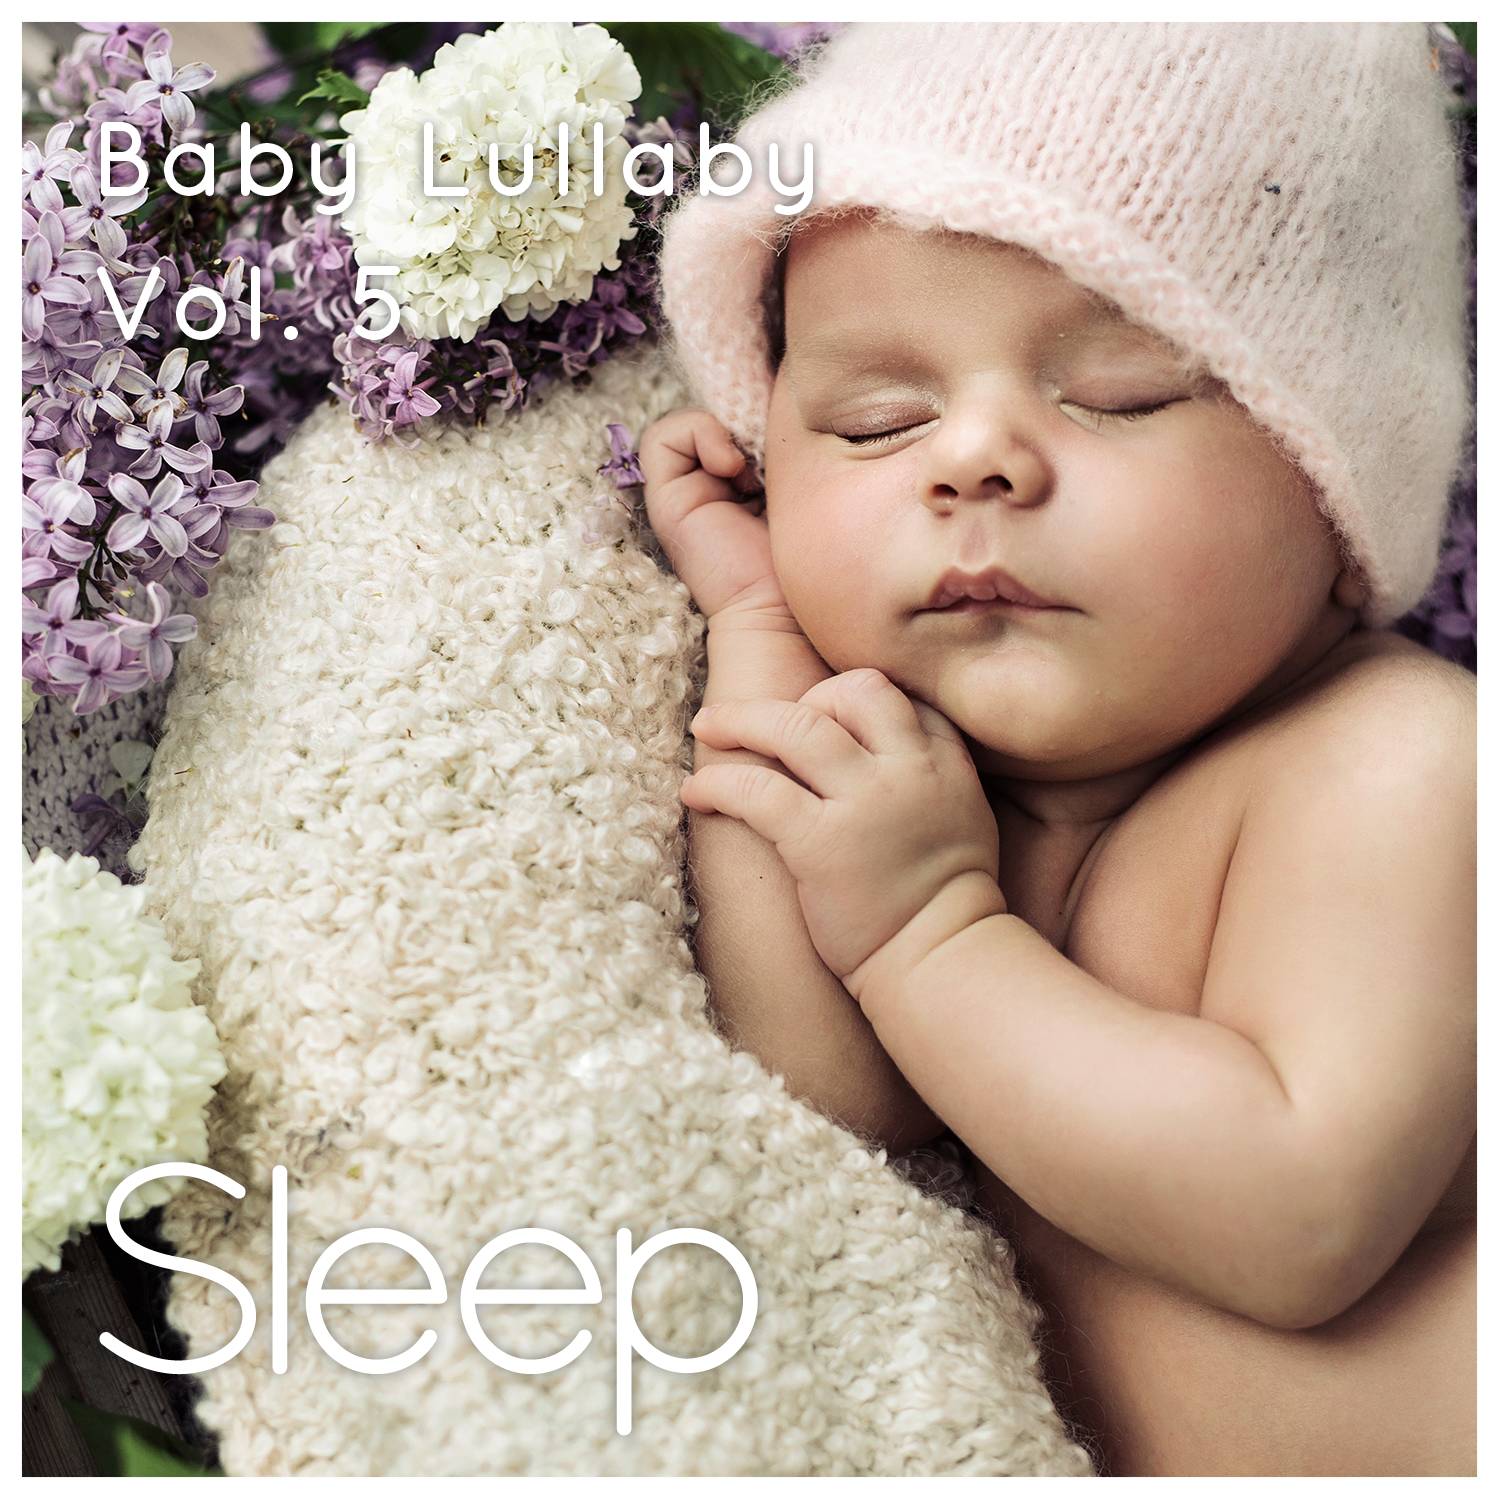 Baby Sleep Ambient Lullaby, Pt. 23